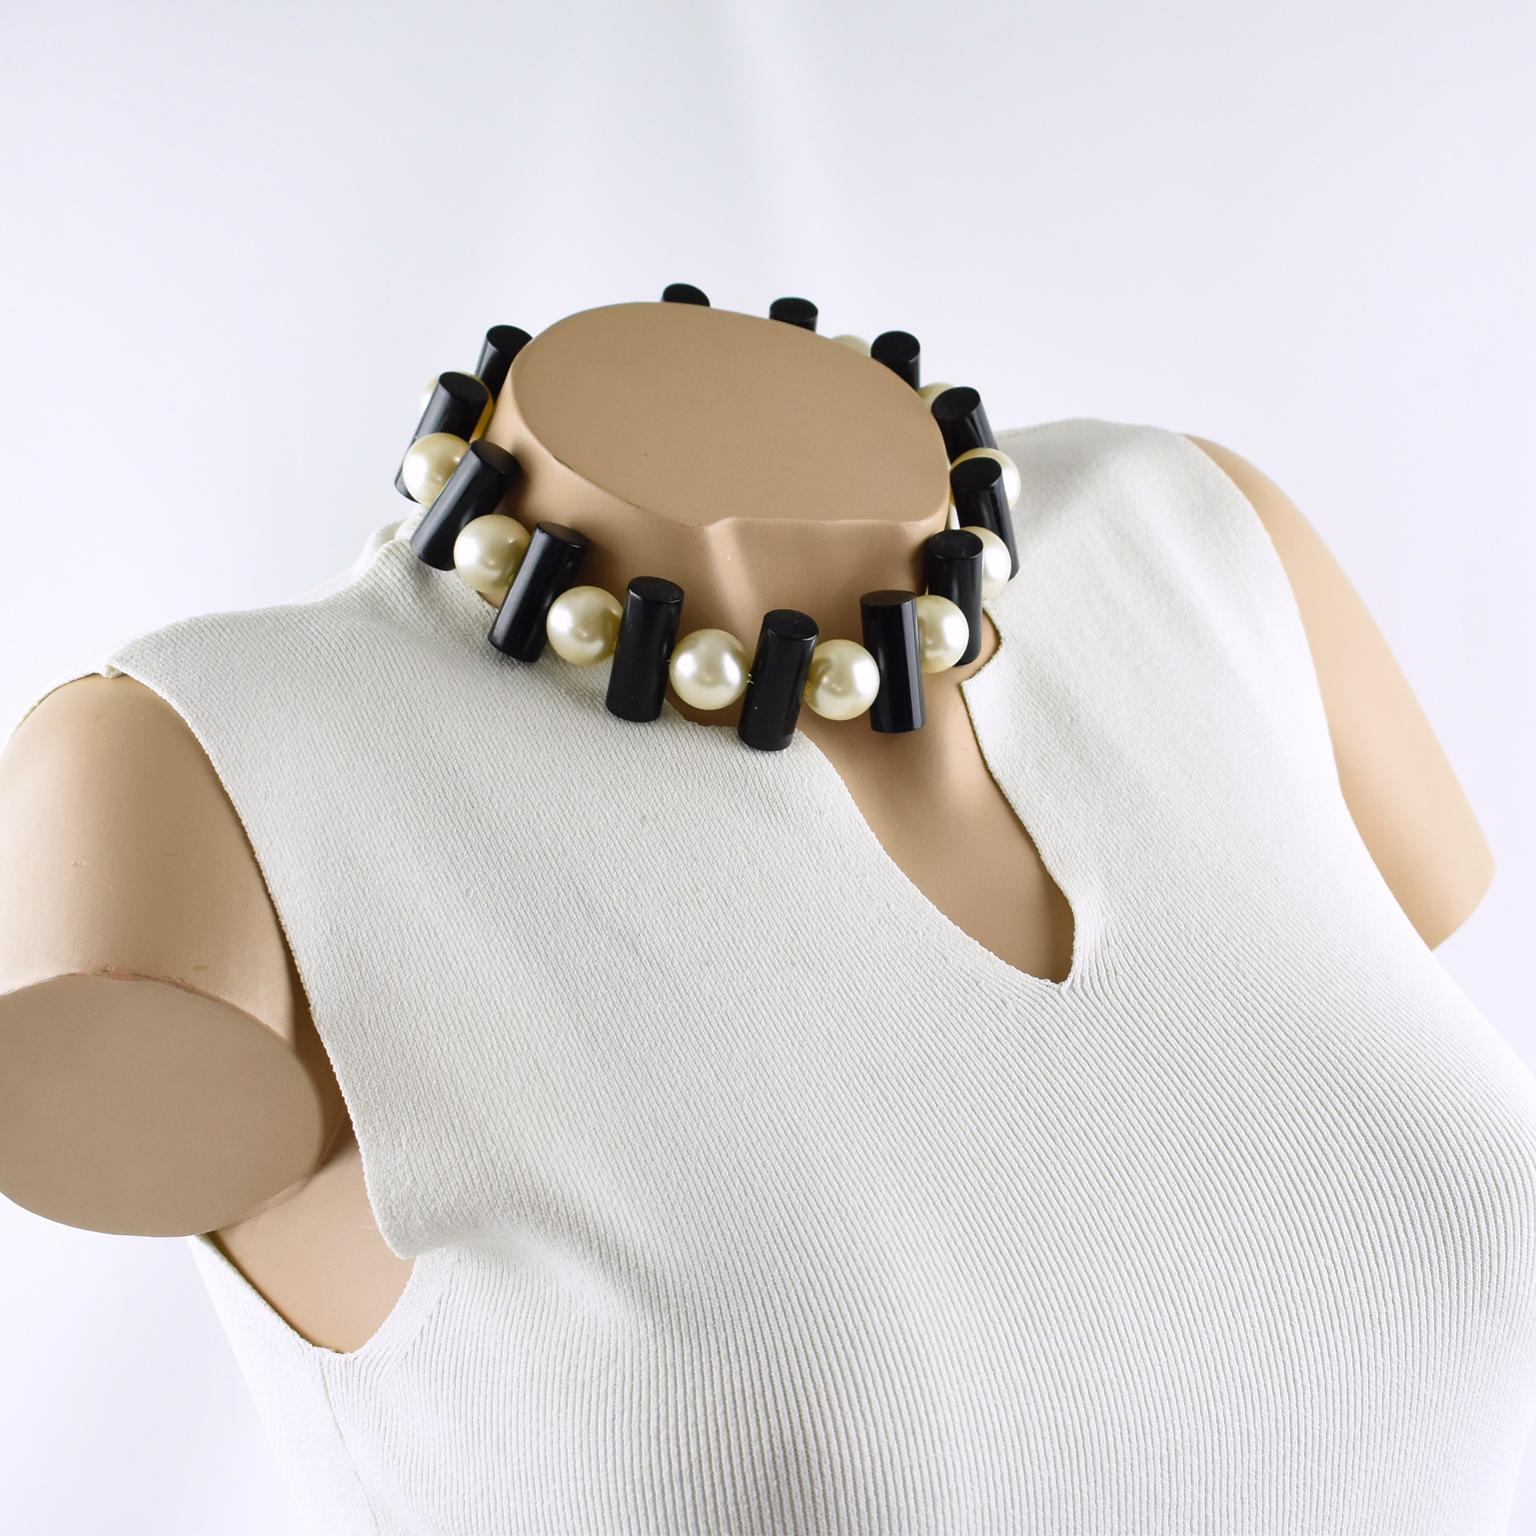 Stunning choker necklace by Judith Hendler. This around-the-neck necklace is from the 1980s and features acrylic or Lucite geometric black stick beads compliment with huge pearl imitation beads. Just an amazing rare piece.
Measurements: necklace